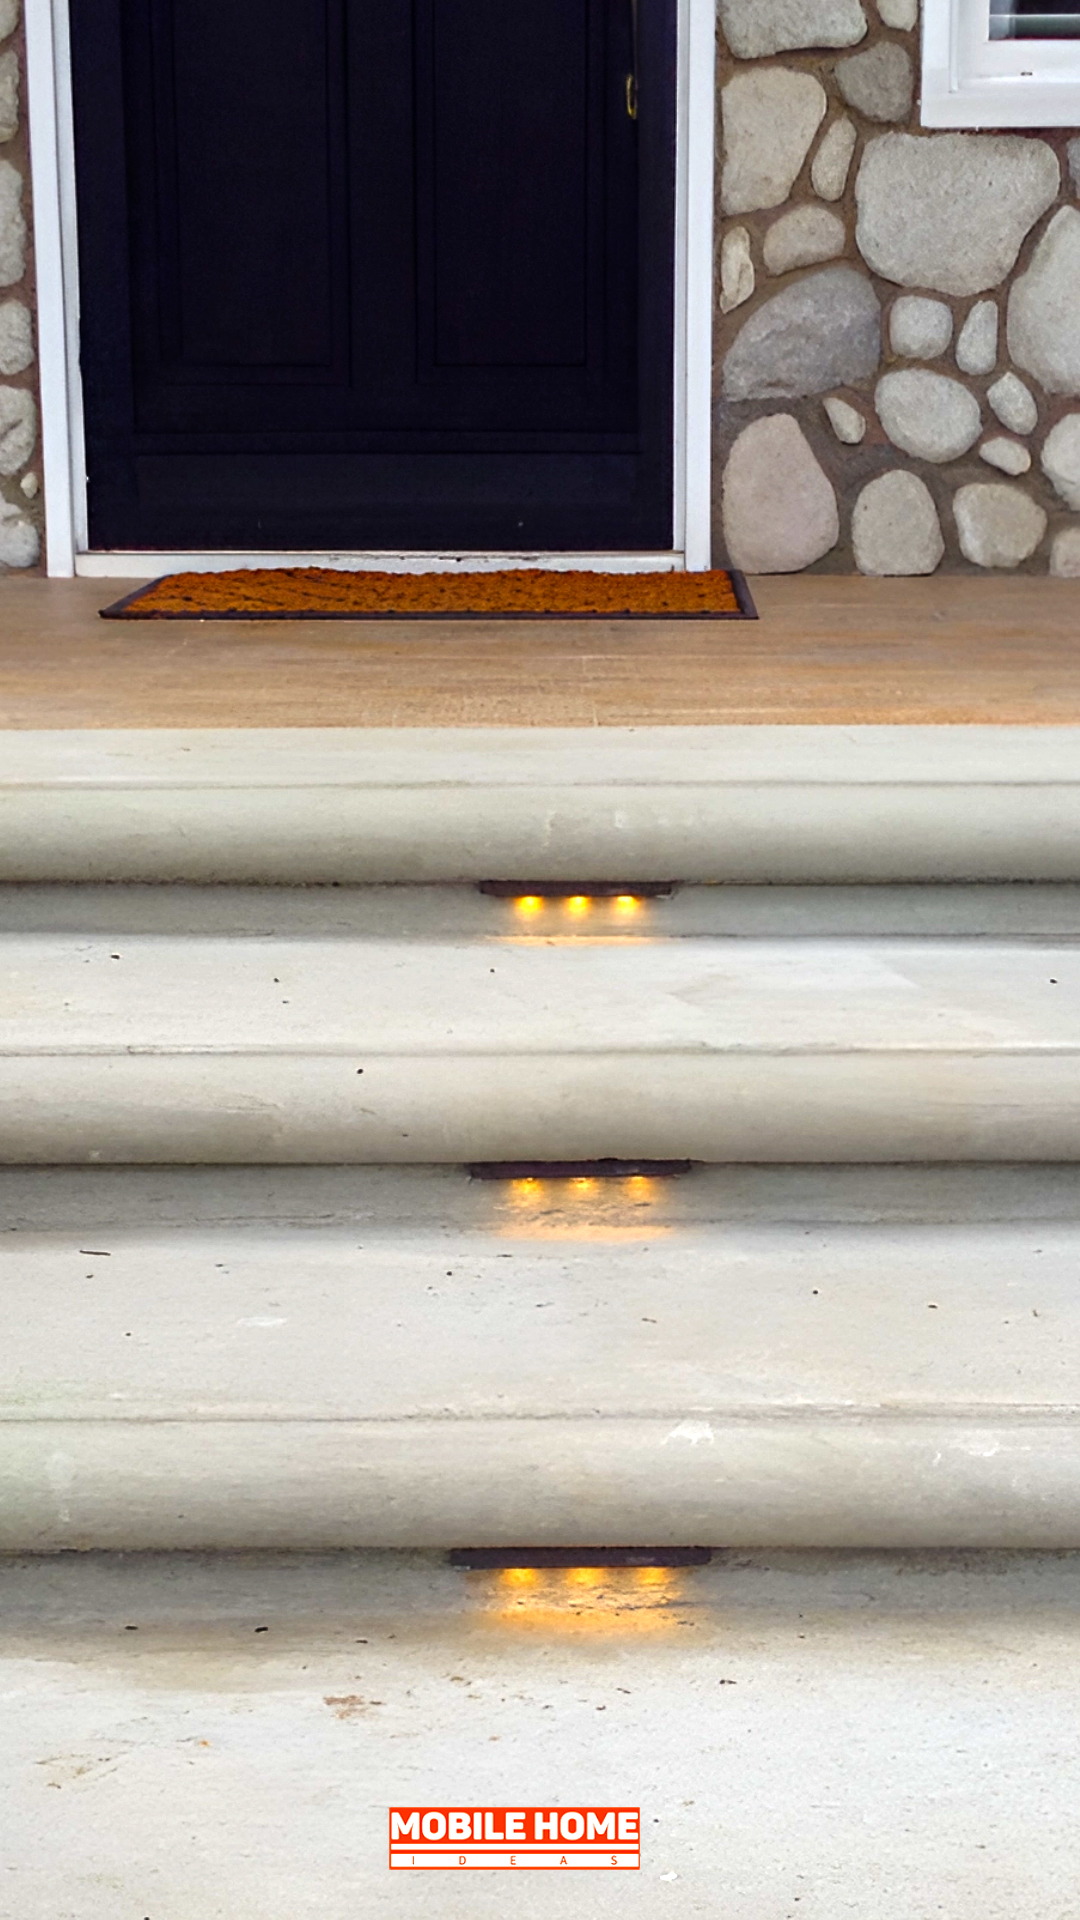 Mobile-Home-Concrete-Steps-Lighting Features